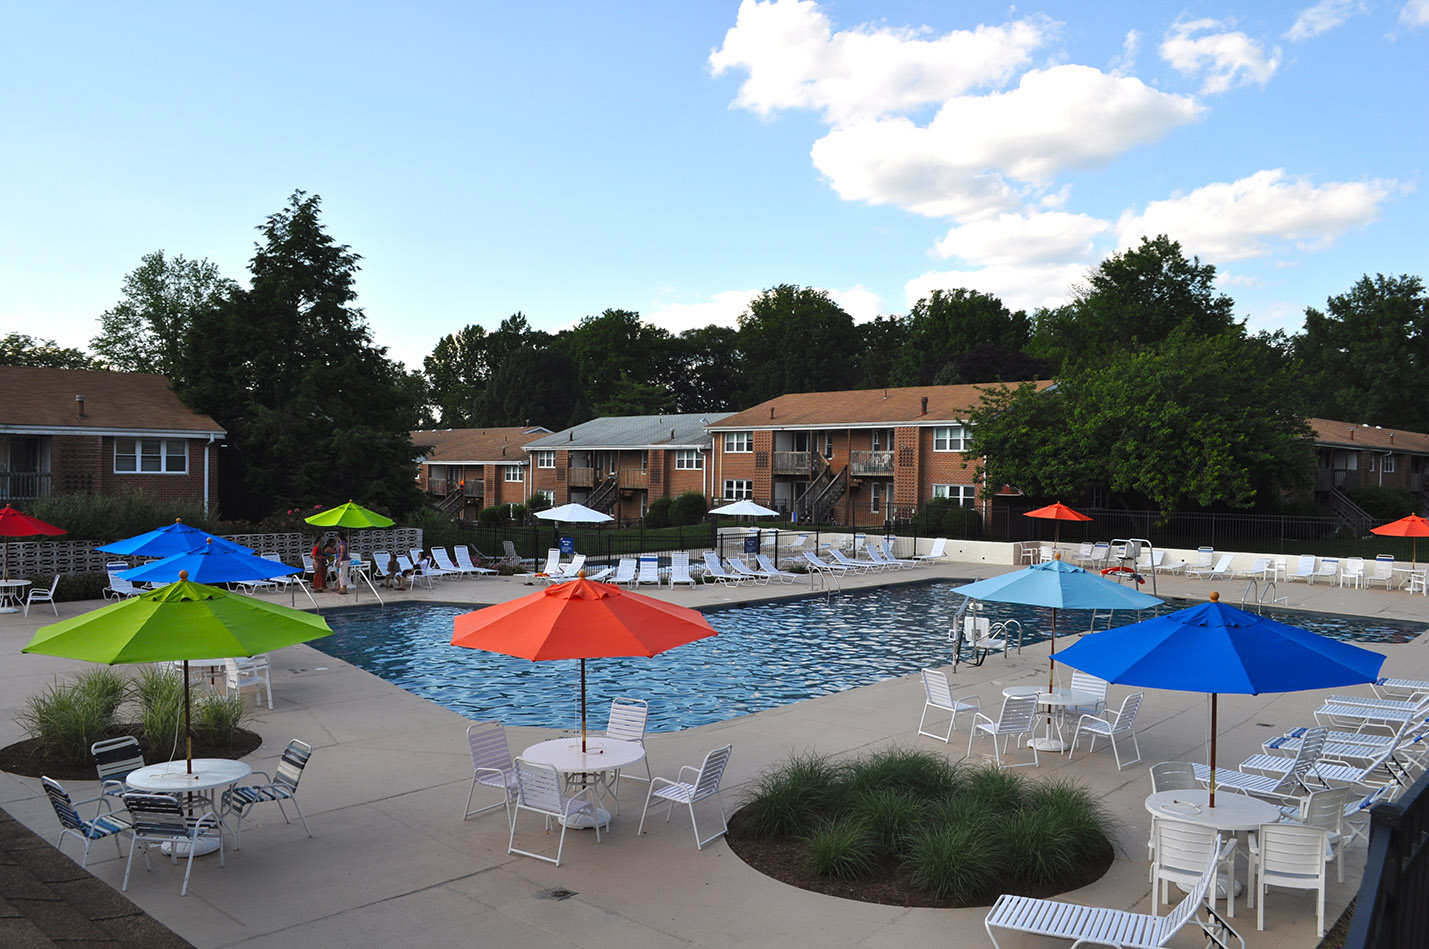 Outdoor shot of Radwyn Pool area with umbrellas, tables, and lounge chairs